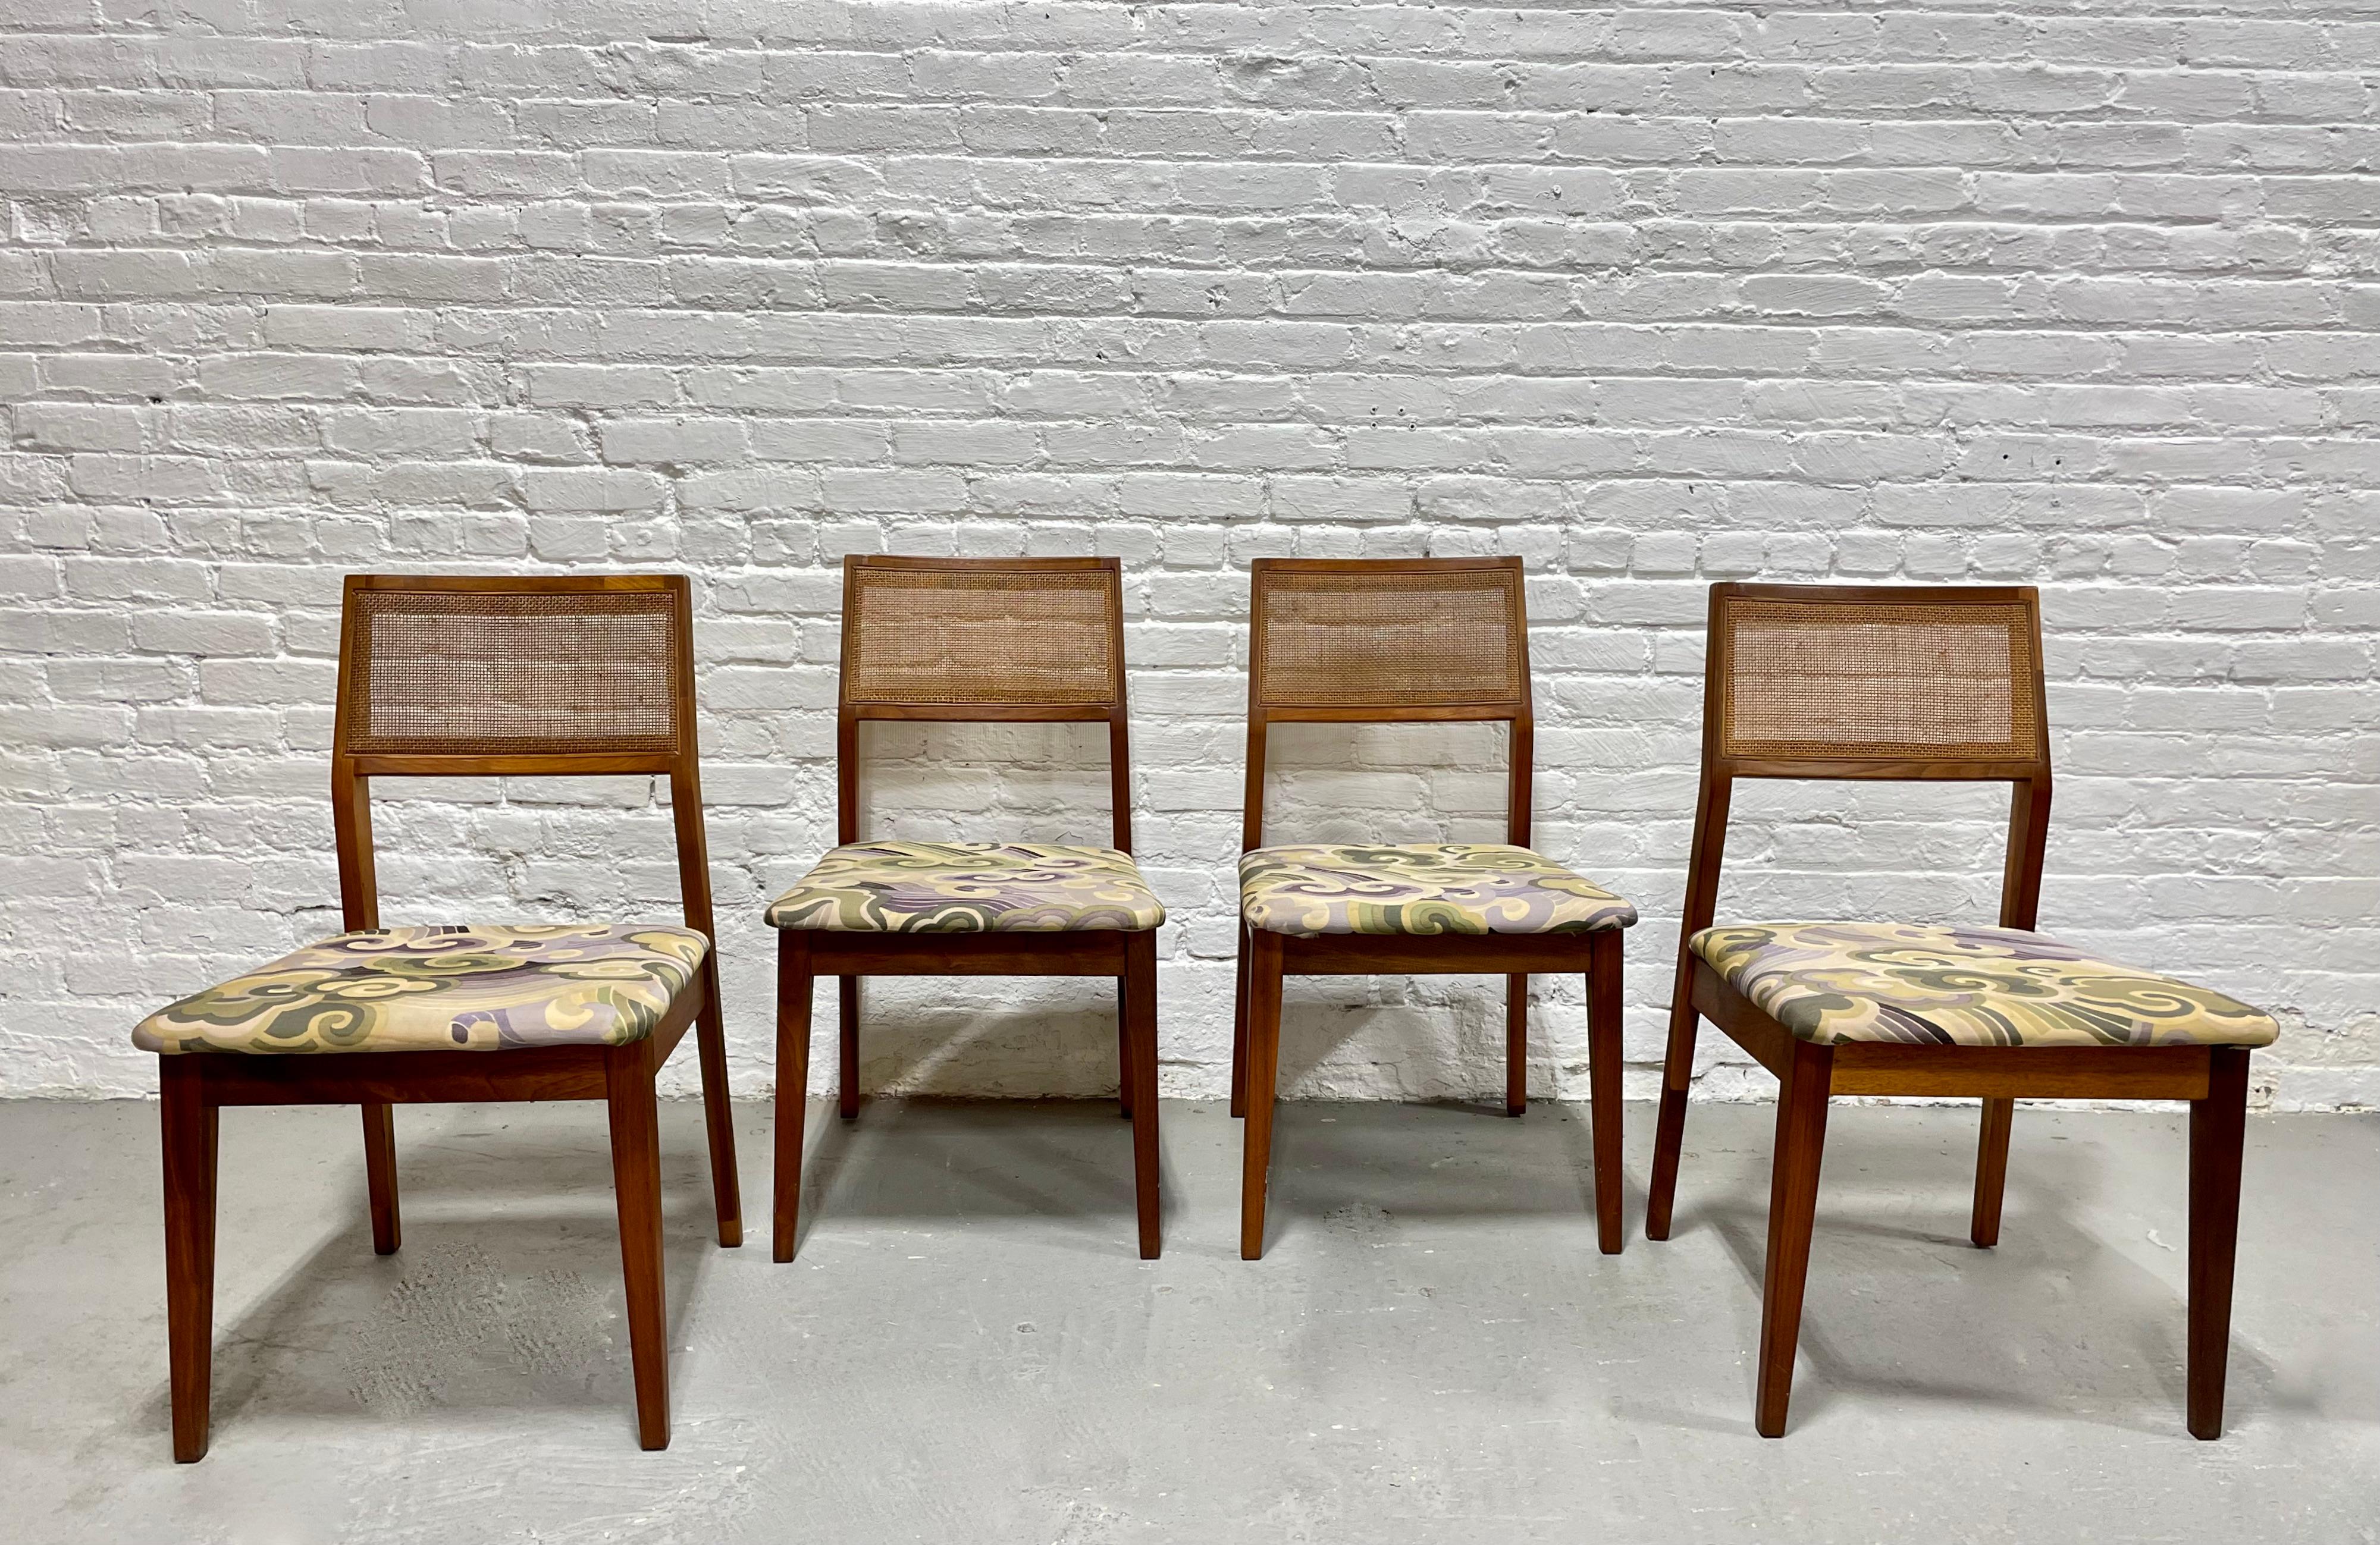 Set of four Mid Century Modern Walnut Caned dining chairs, c. 1960's. Lovely solid frames with incredible wood coloring and perfectly caned back rests. Upholstery is a vibrant retro fabric in nice condition (some light stains on fabric but